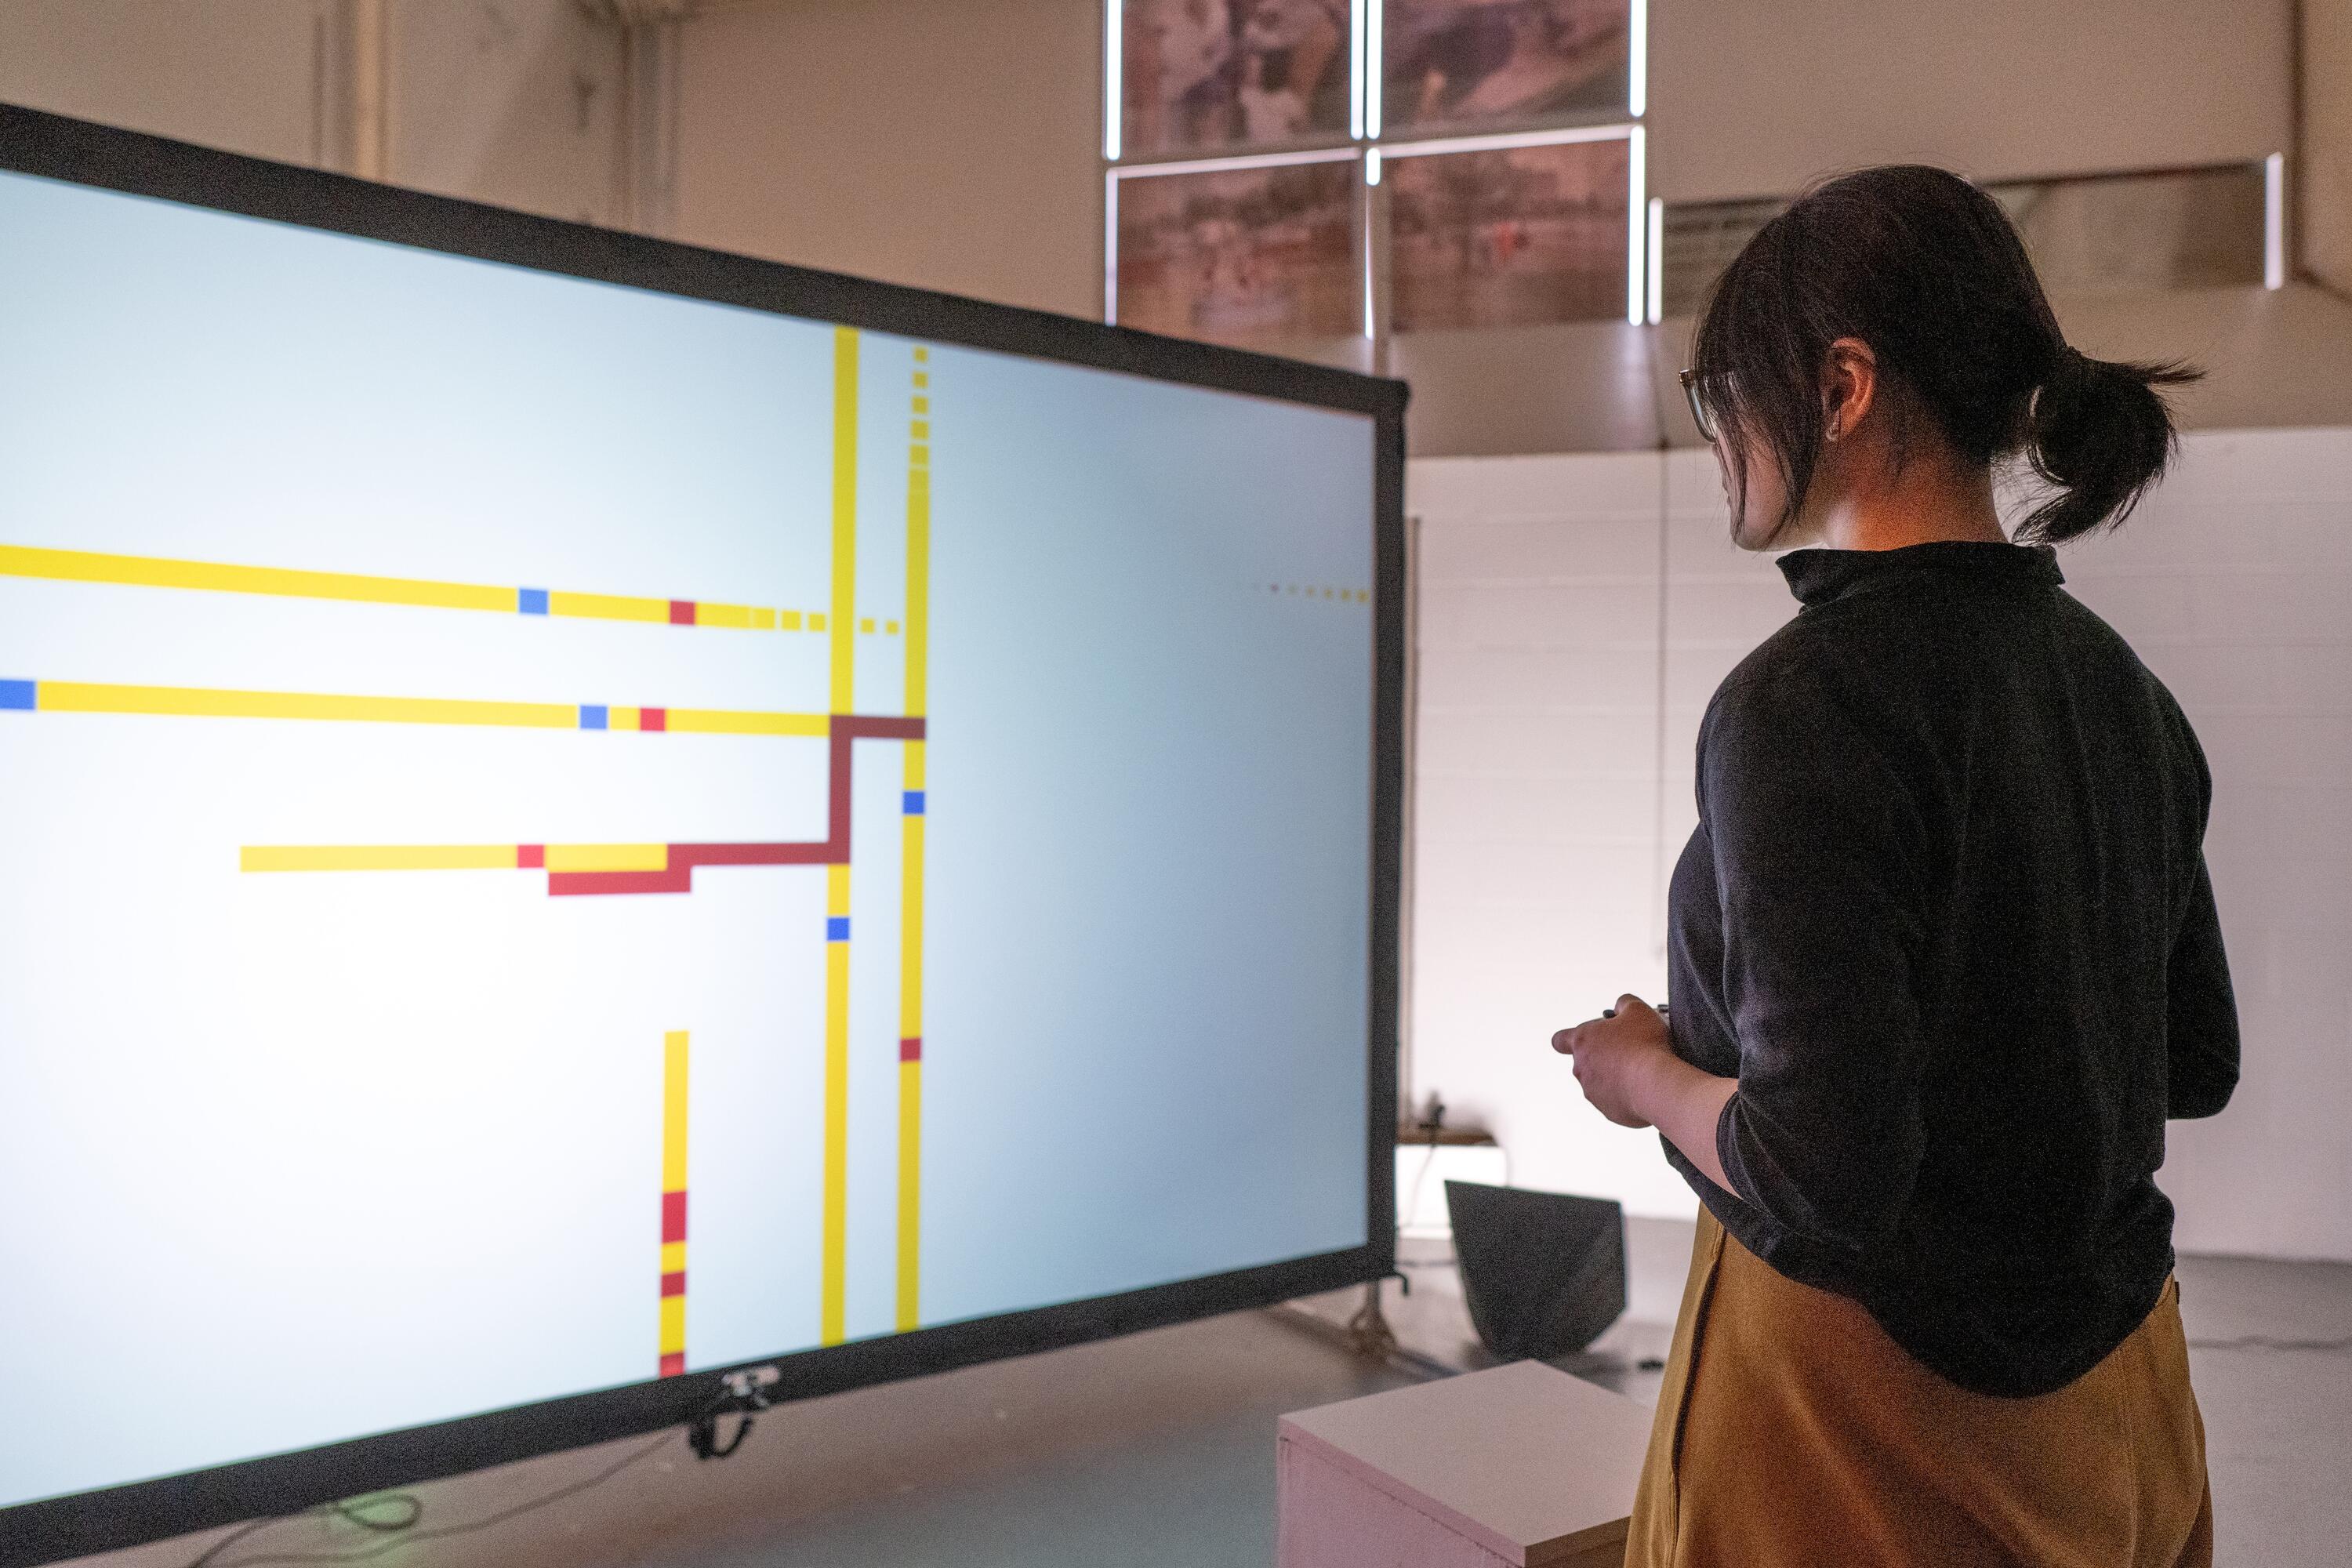 Student playing a revised verison of snake: standing in front of a screen holding a controller. back is facing the camera